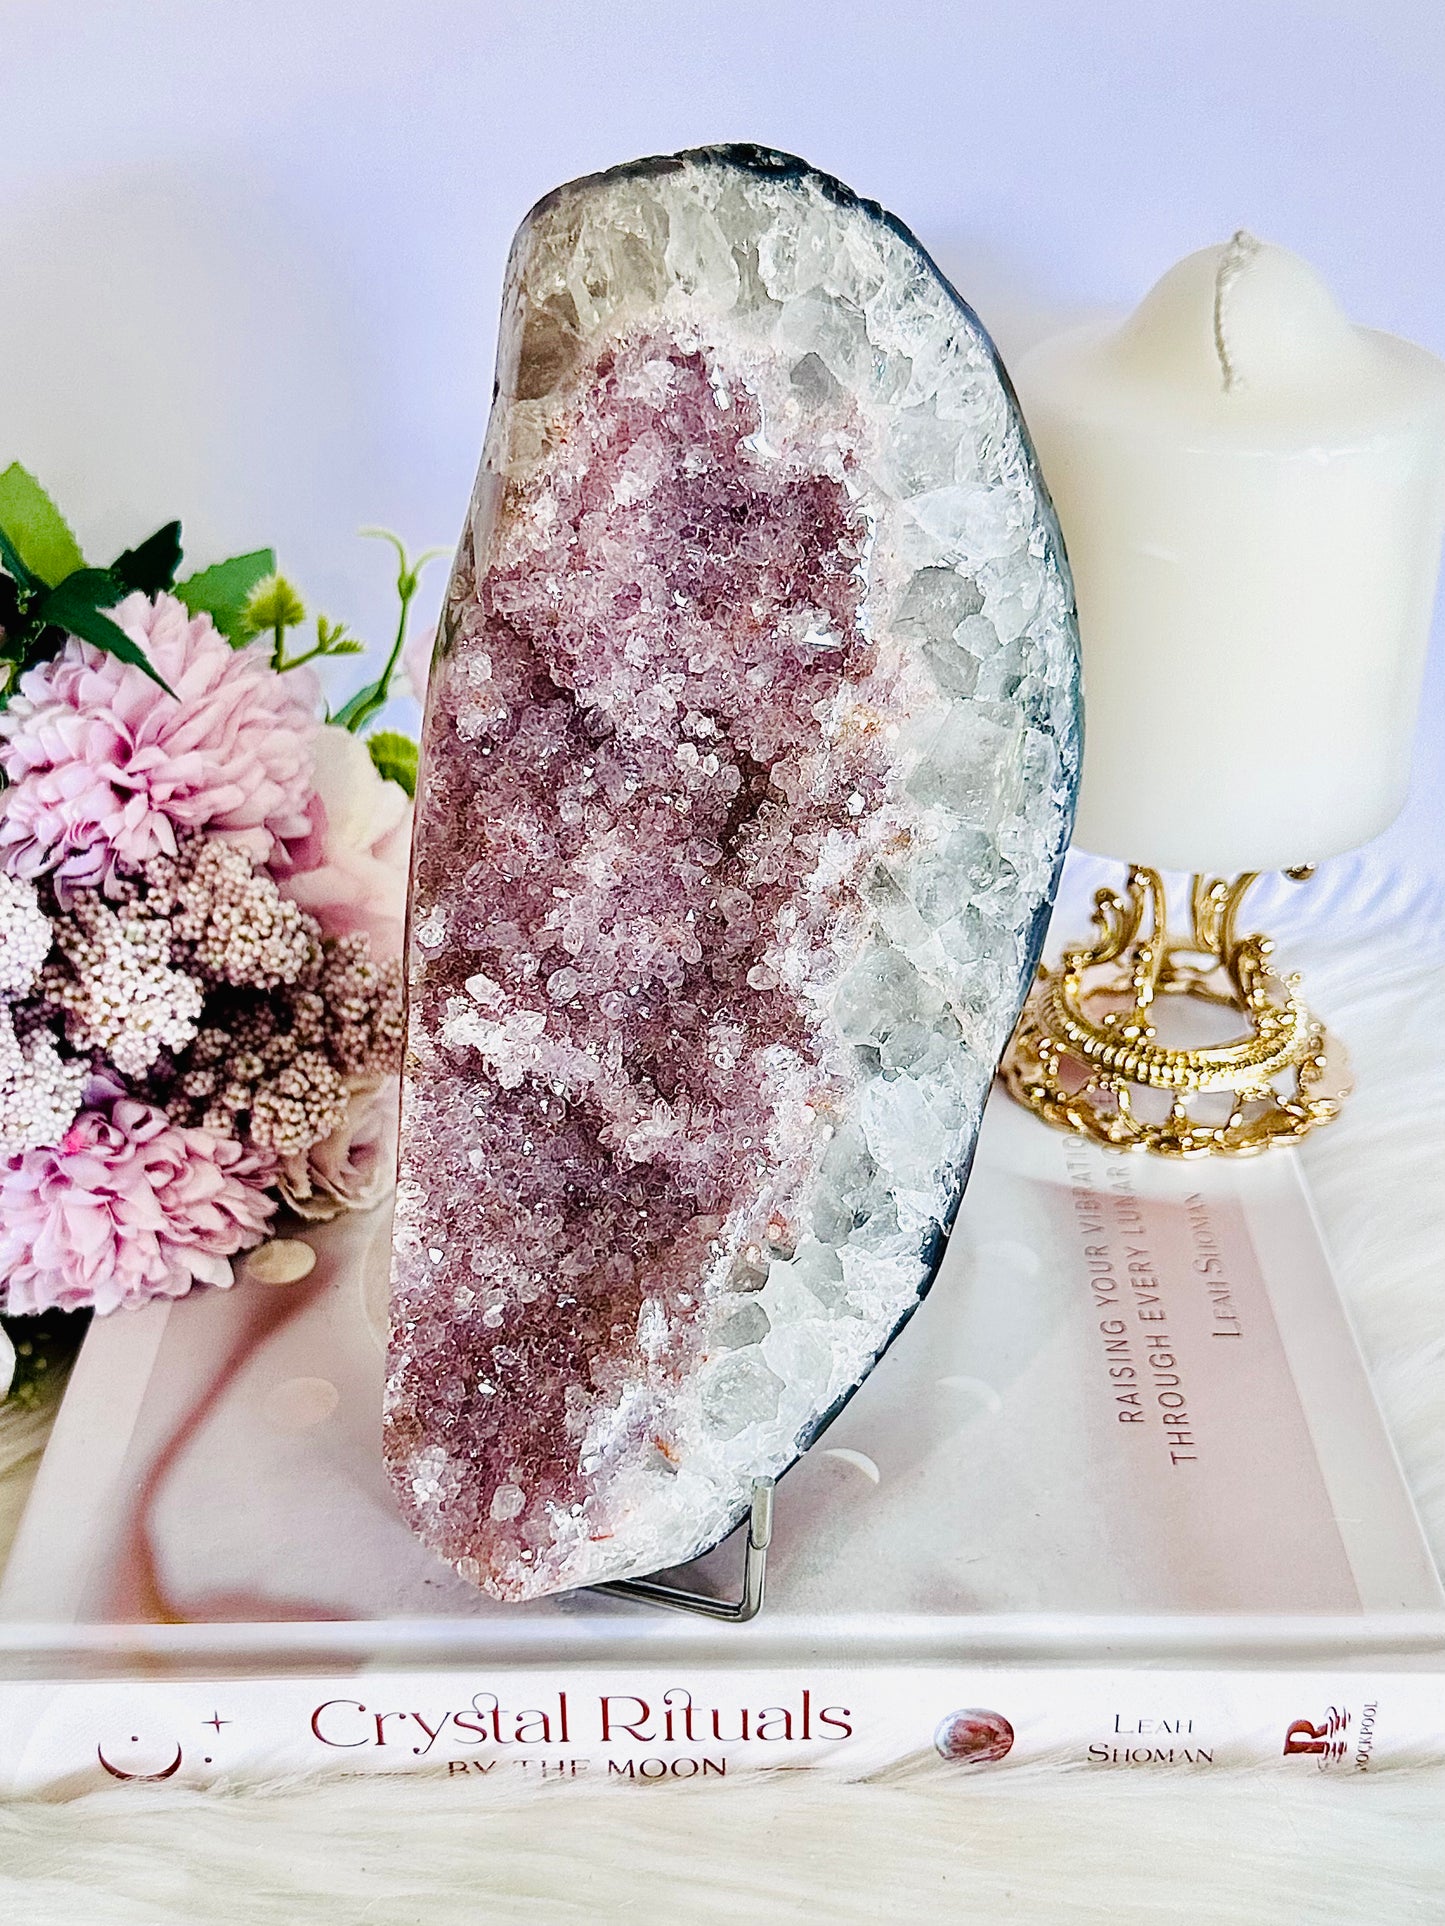 Wow!!! Elegant & Classy Large Shimmering Natural Druzy Amethyst Freeform 21cm 1.2KG On Stand From Brazil